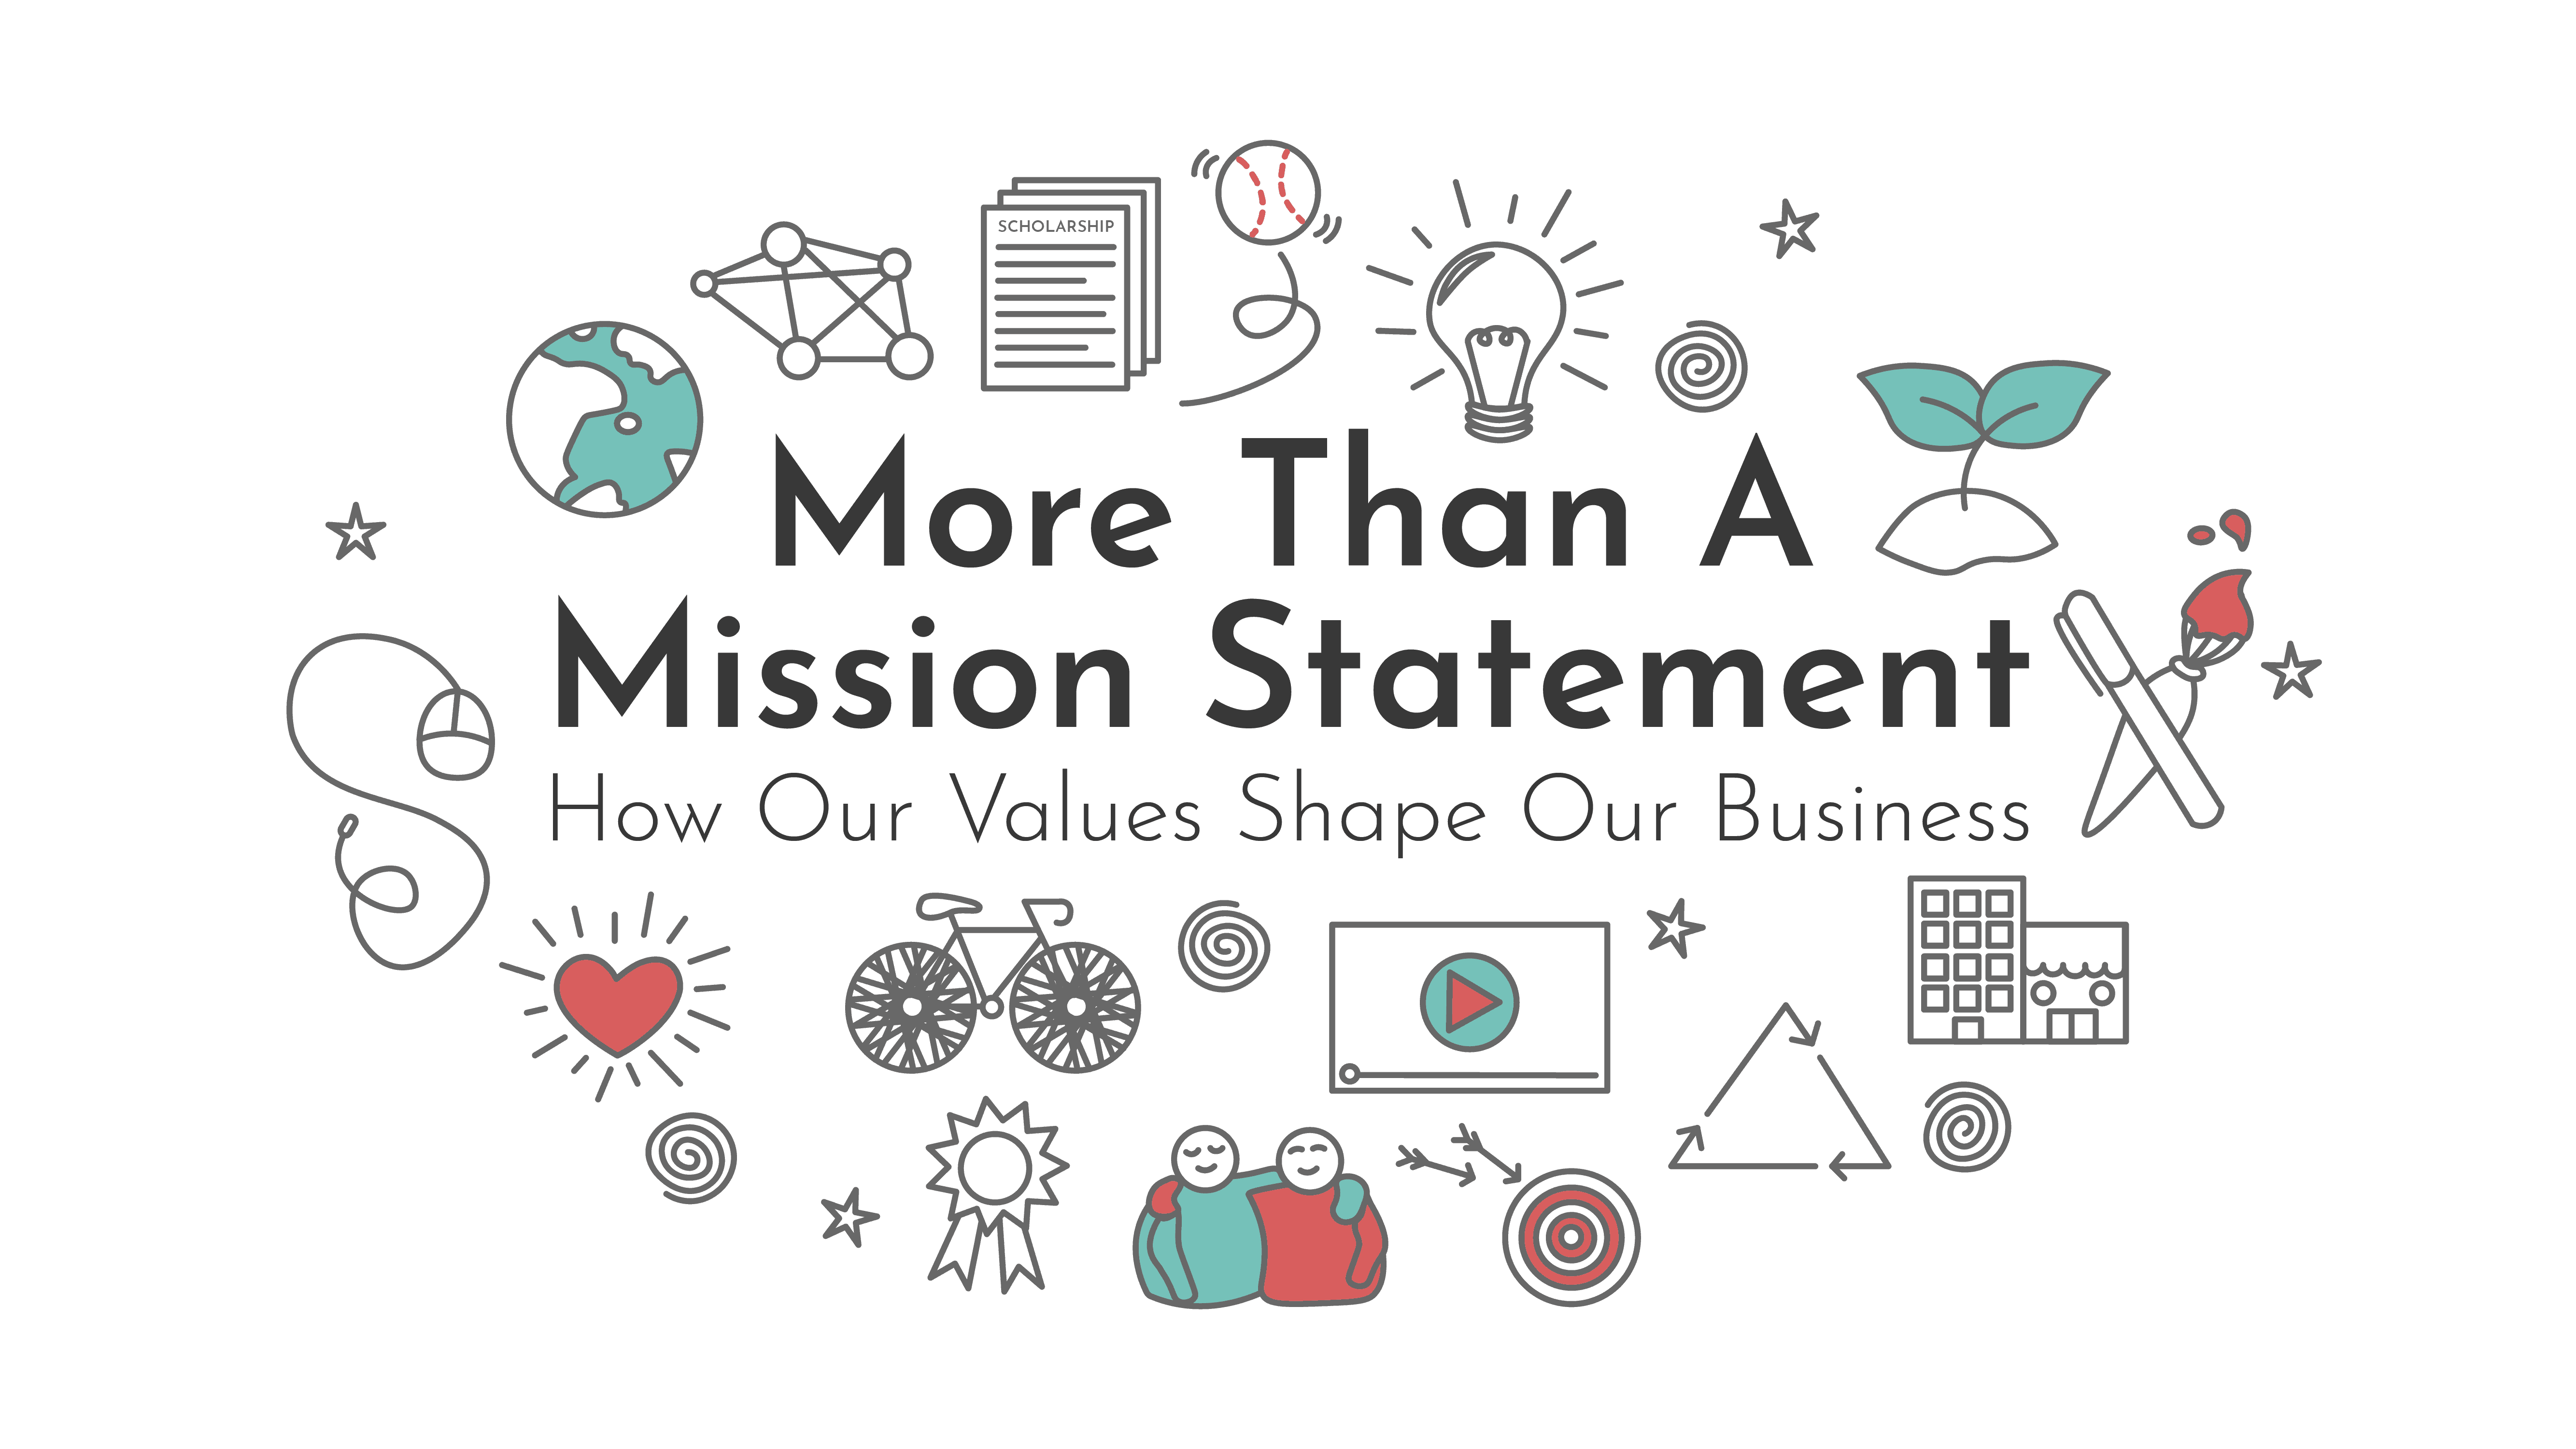 Title reads "More Than a Mission Statement" in Black letters on a white background surrounded by small digital icons; subtitle: How our Values Shape Our Business